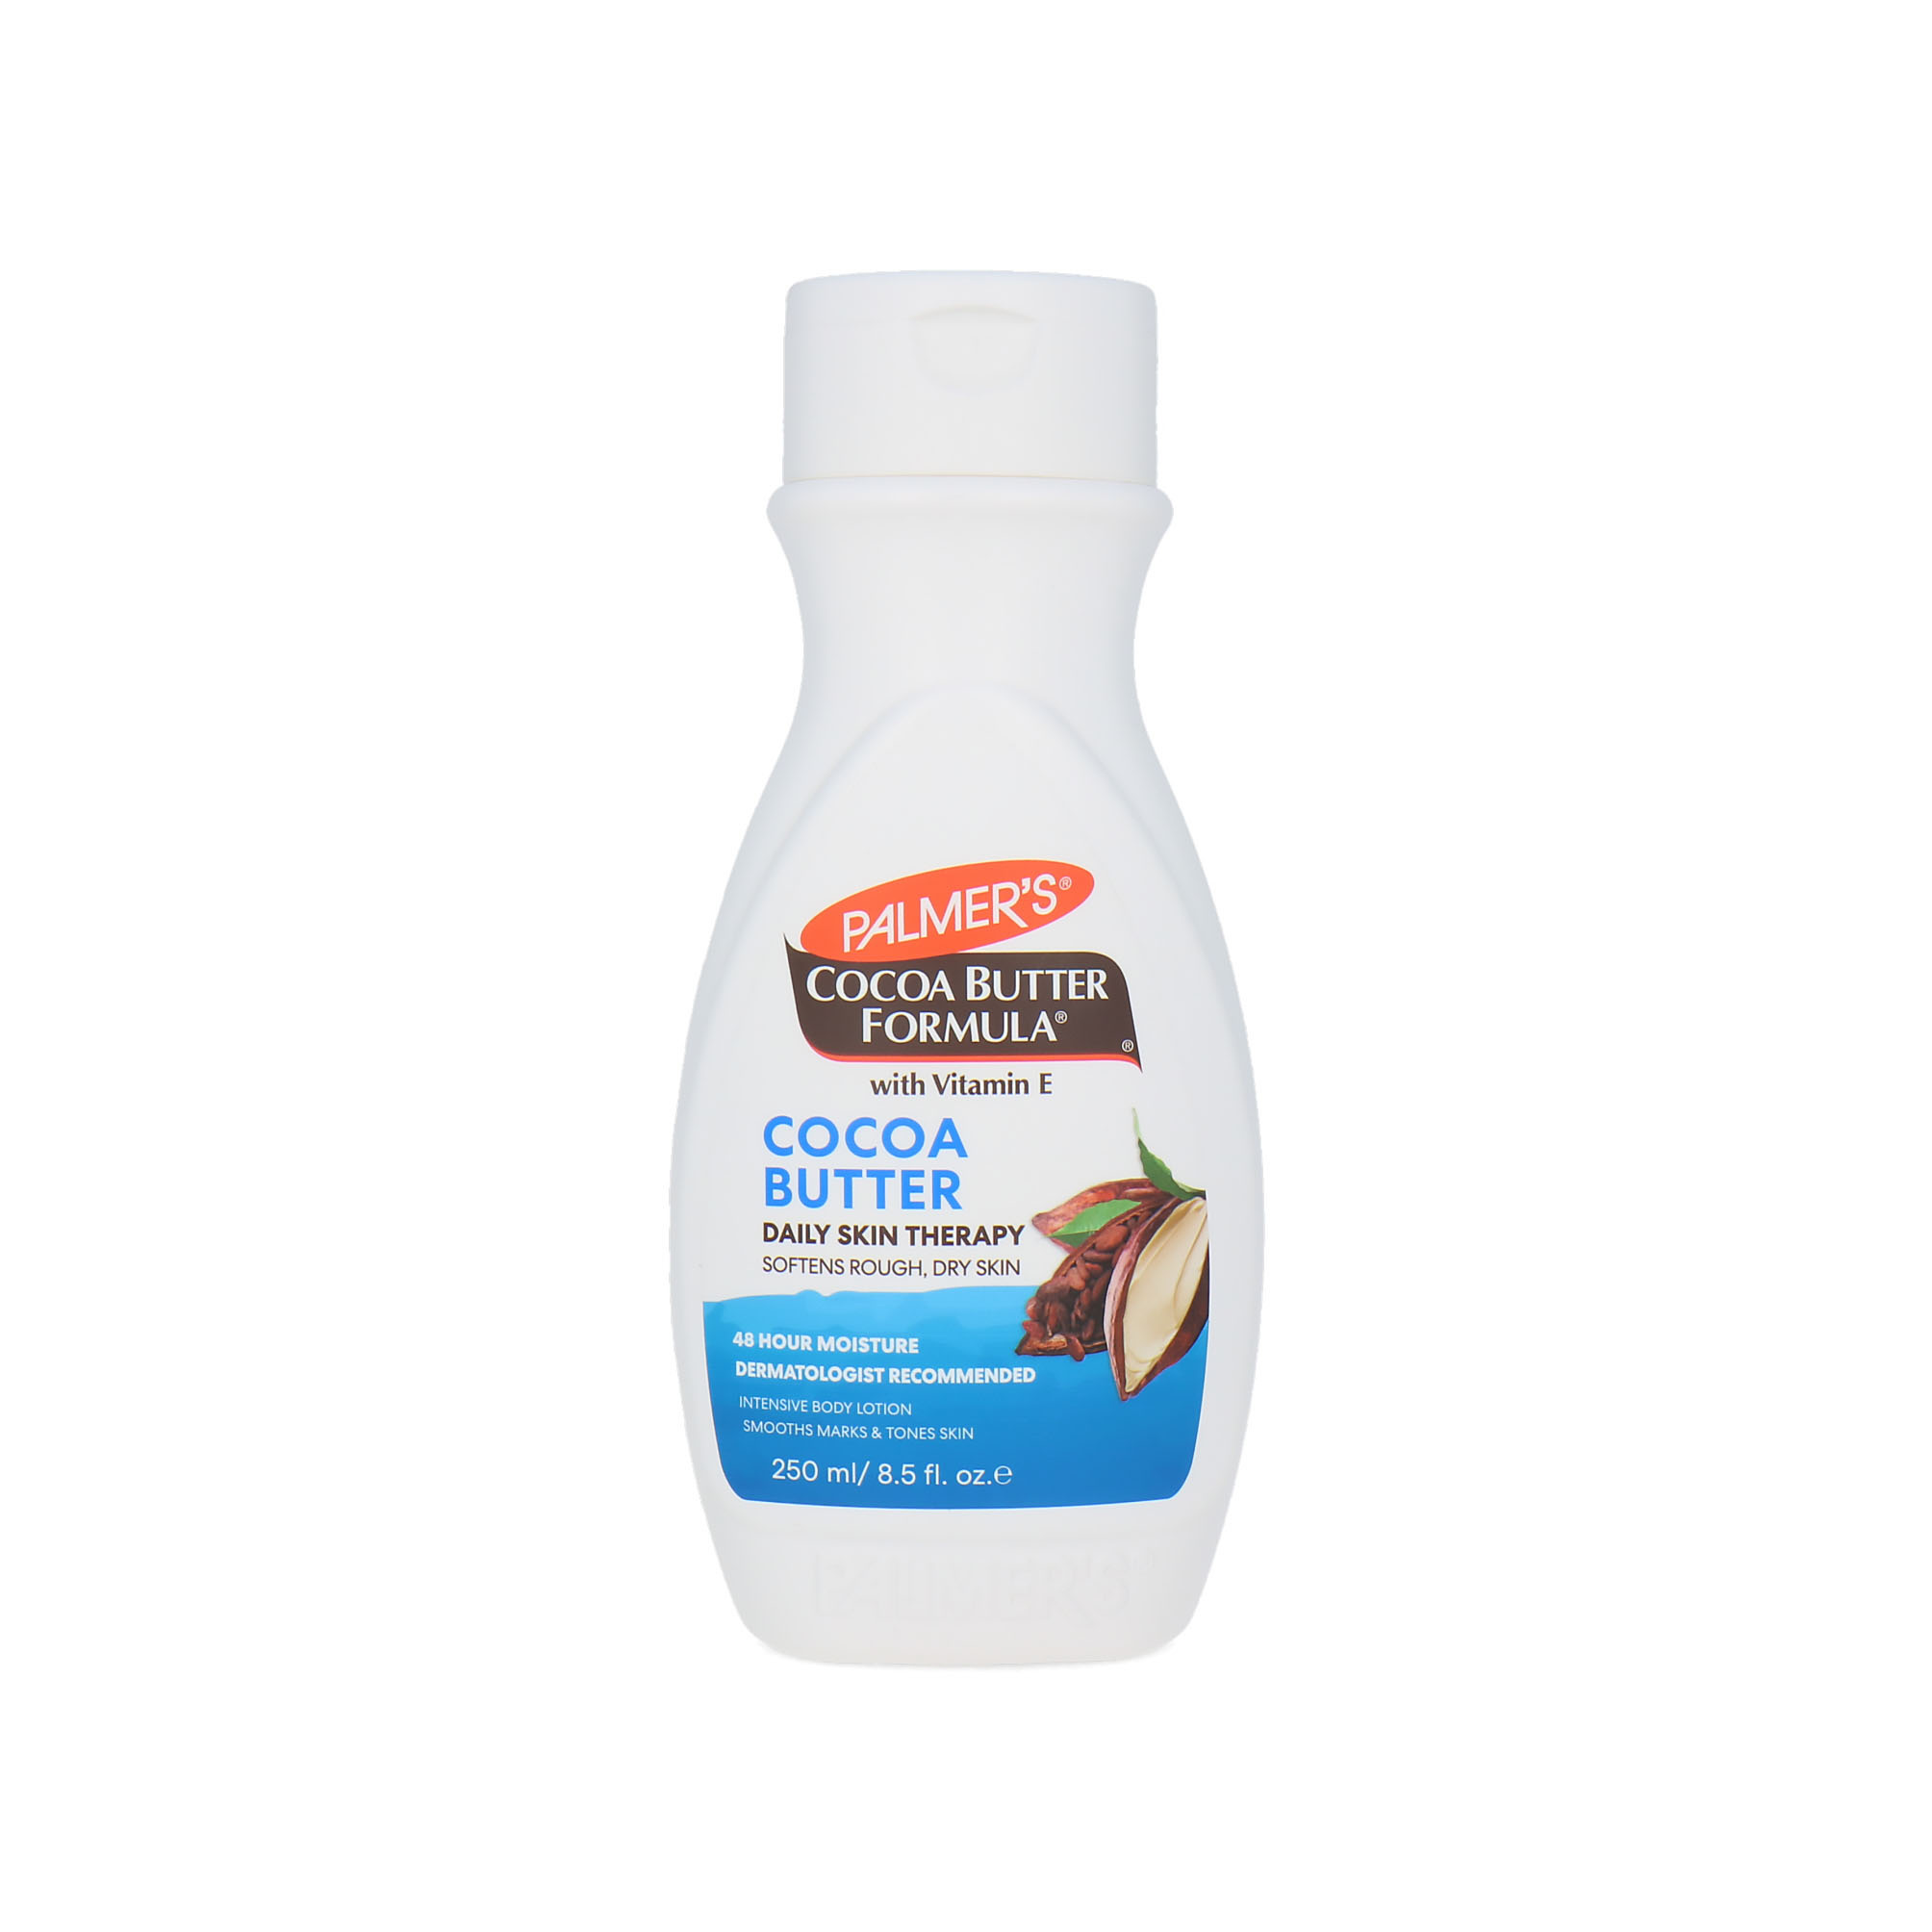 Palmer's Cocoa Butter Daily Skin Therapy Lotion pour le corps - 250 ml